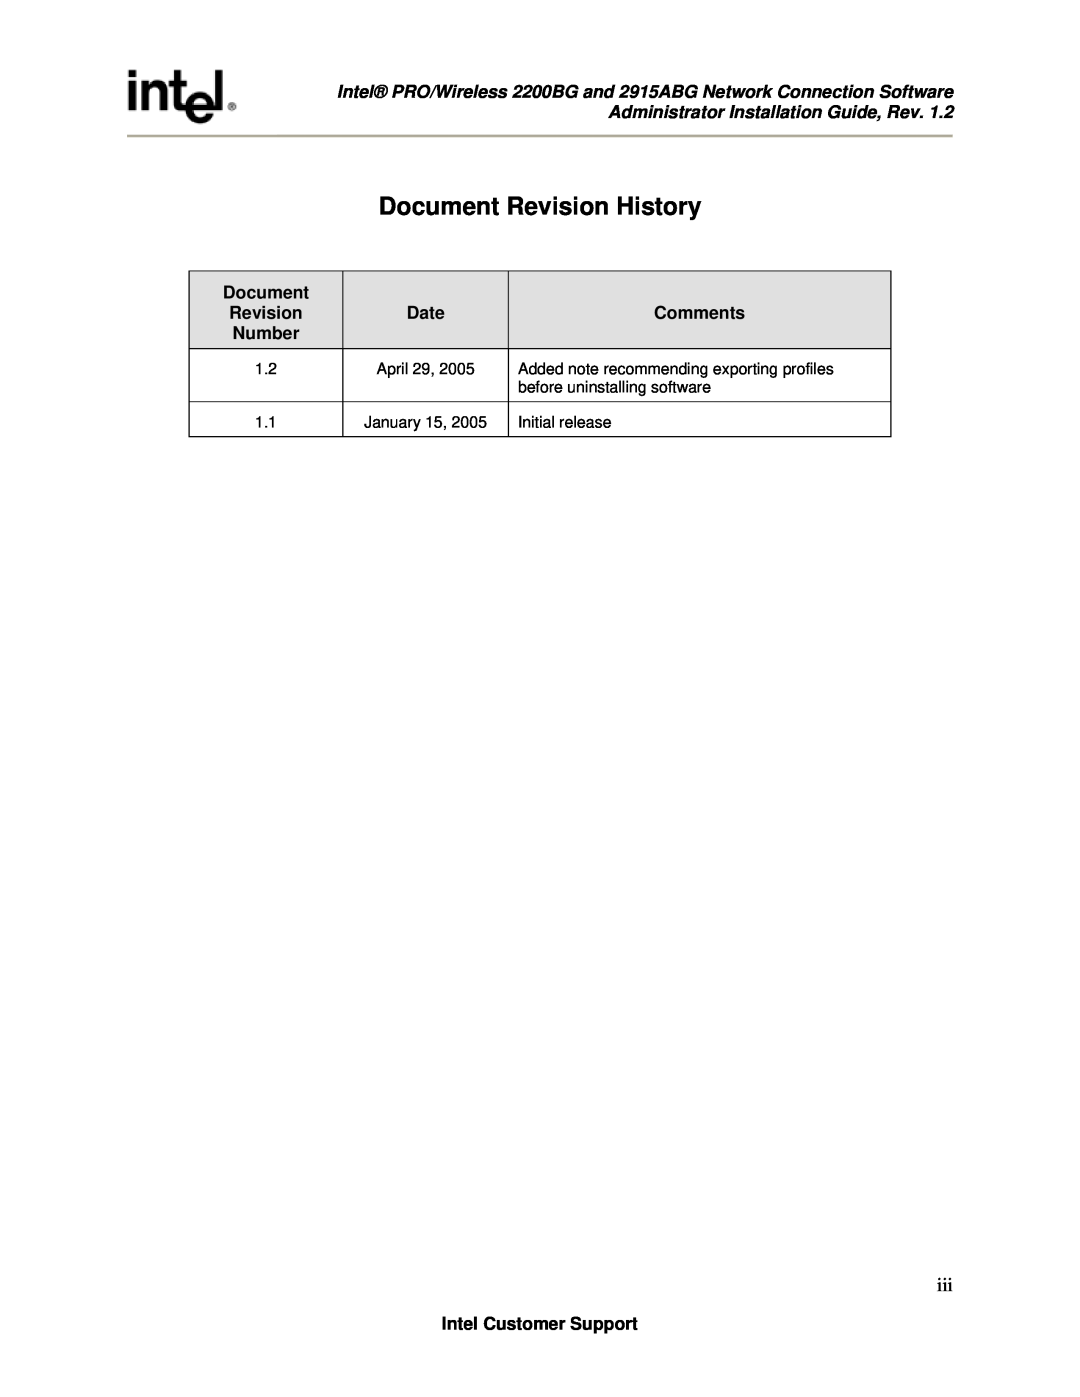 Intel 2915ABG, 2200BG manual Document Revision History, Date, Comments, Number, Intel Customer Support, April, January 15 